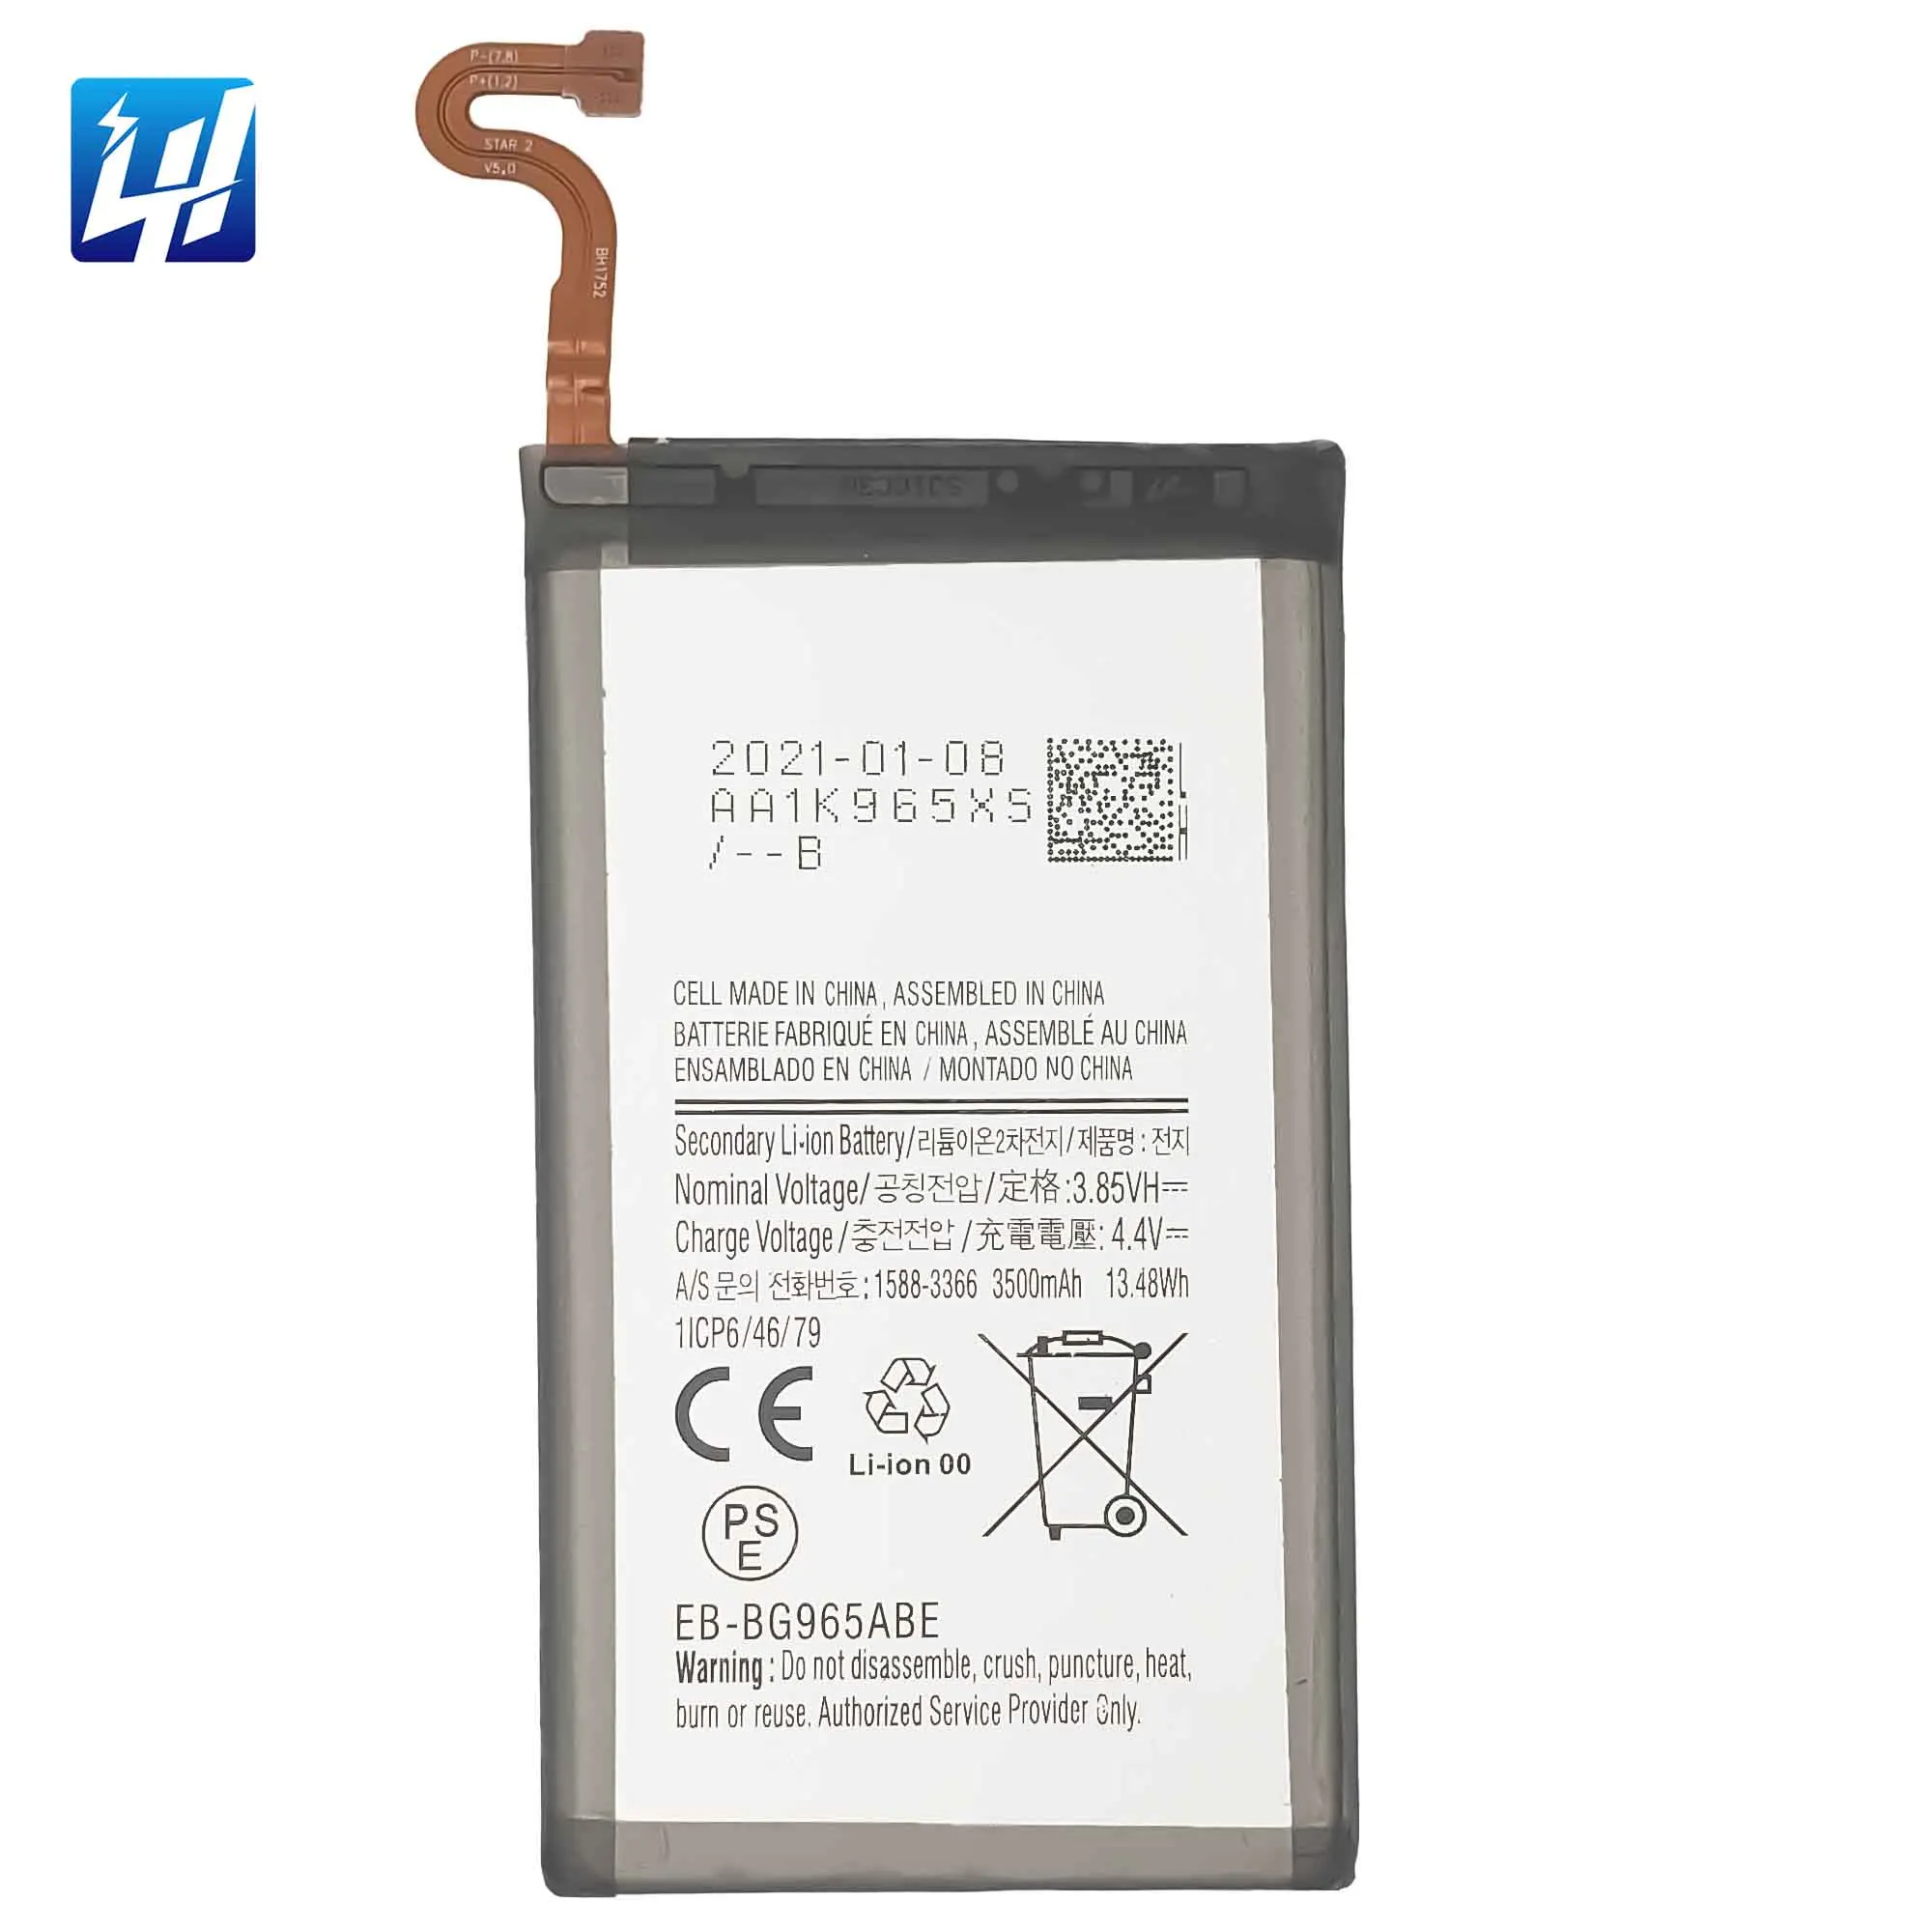 

EB-BG965ABE S9 Plus G965 G965F G965U G965W G9650 mobile phone battery for Samsung Galaxy S9+